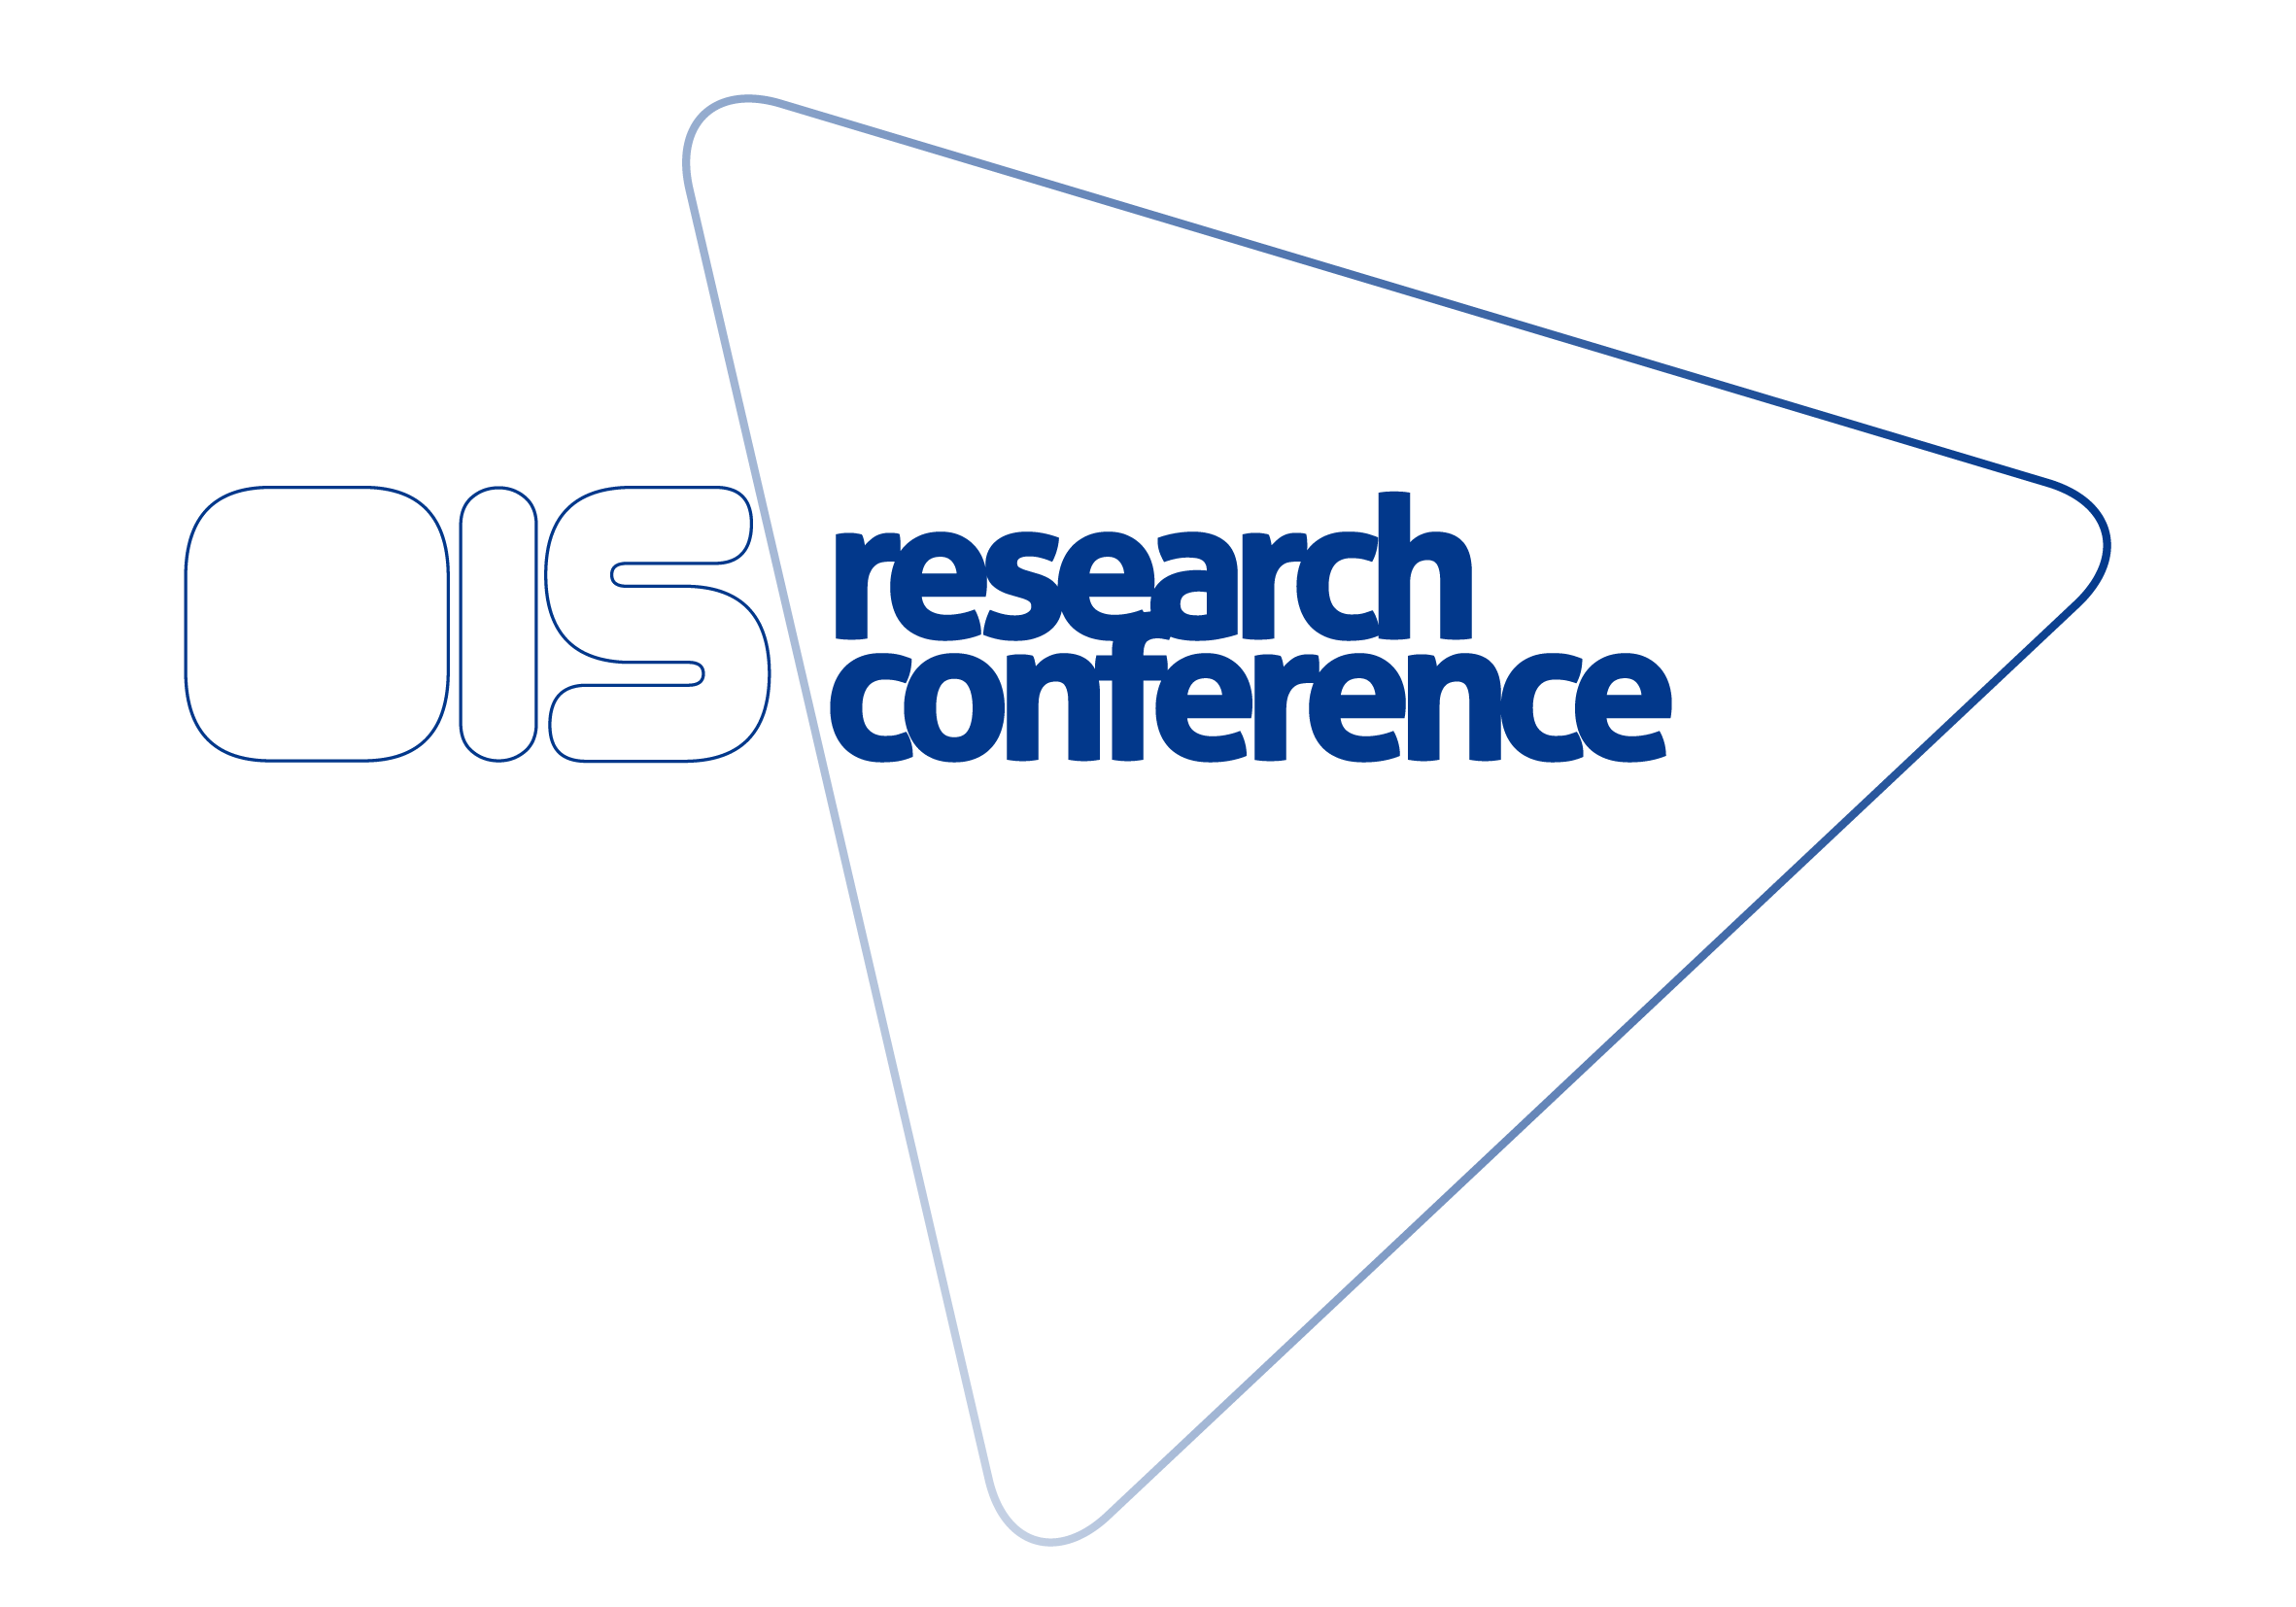 Open Innovation in Science Research Conference